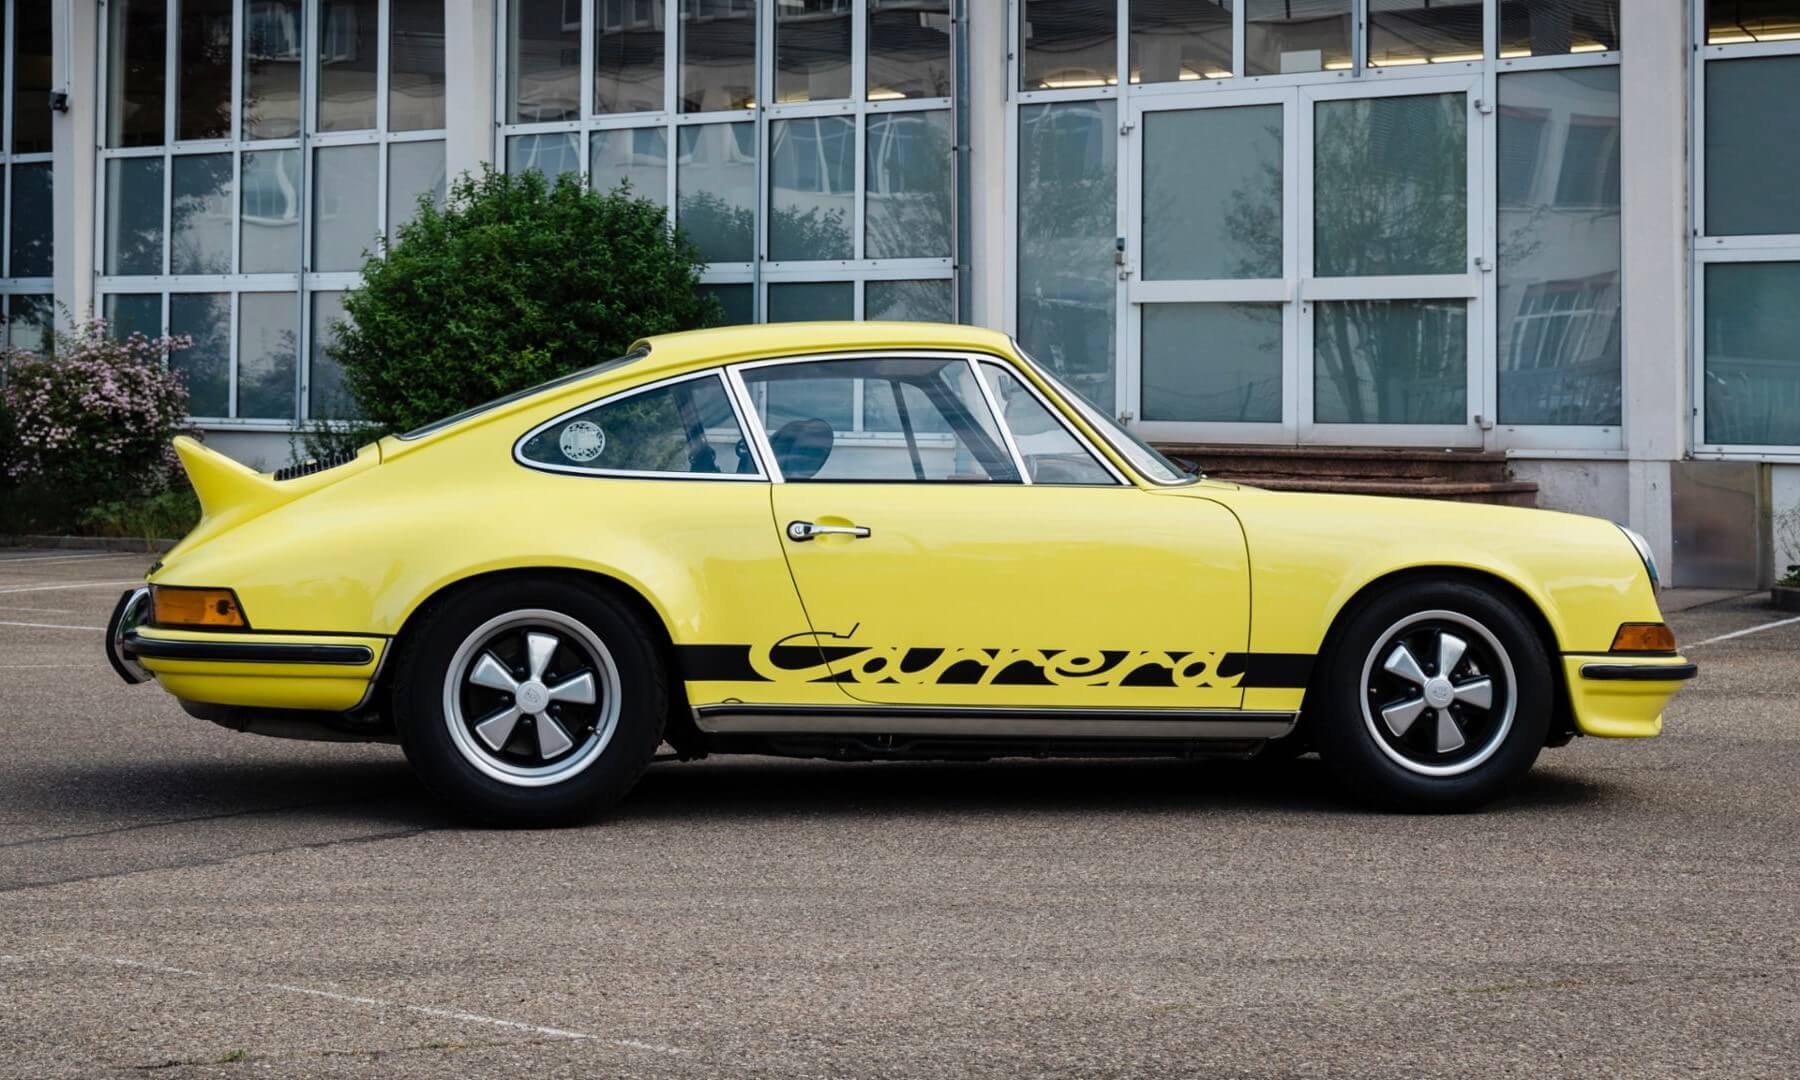 911 Carrera RS 2.7 side